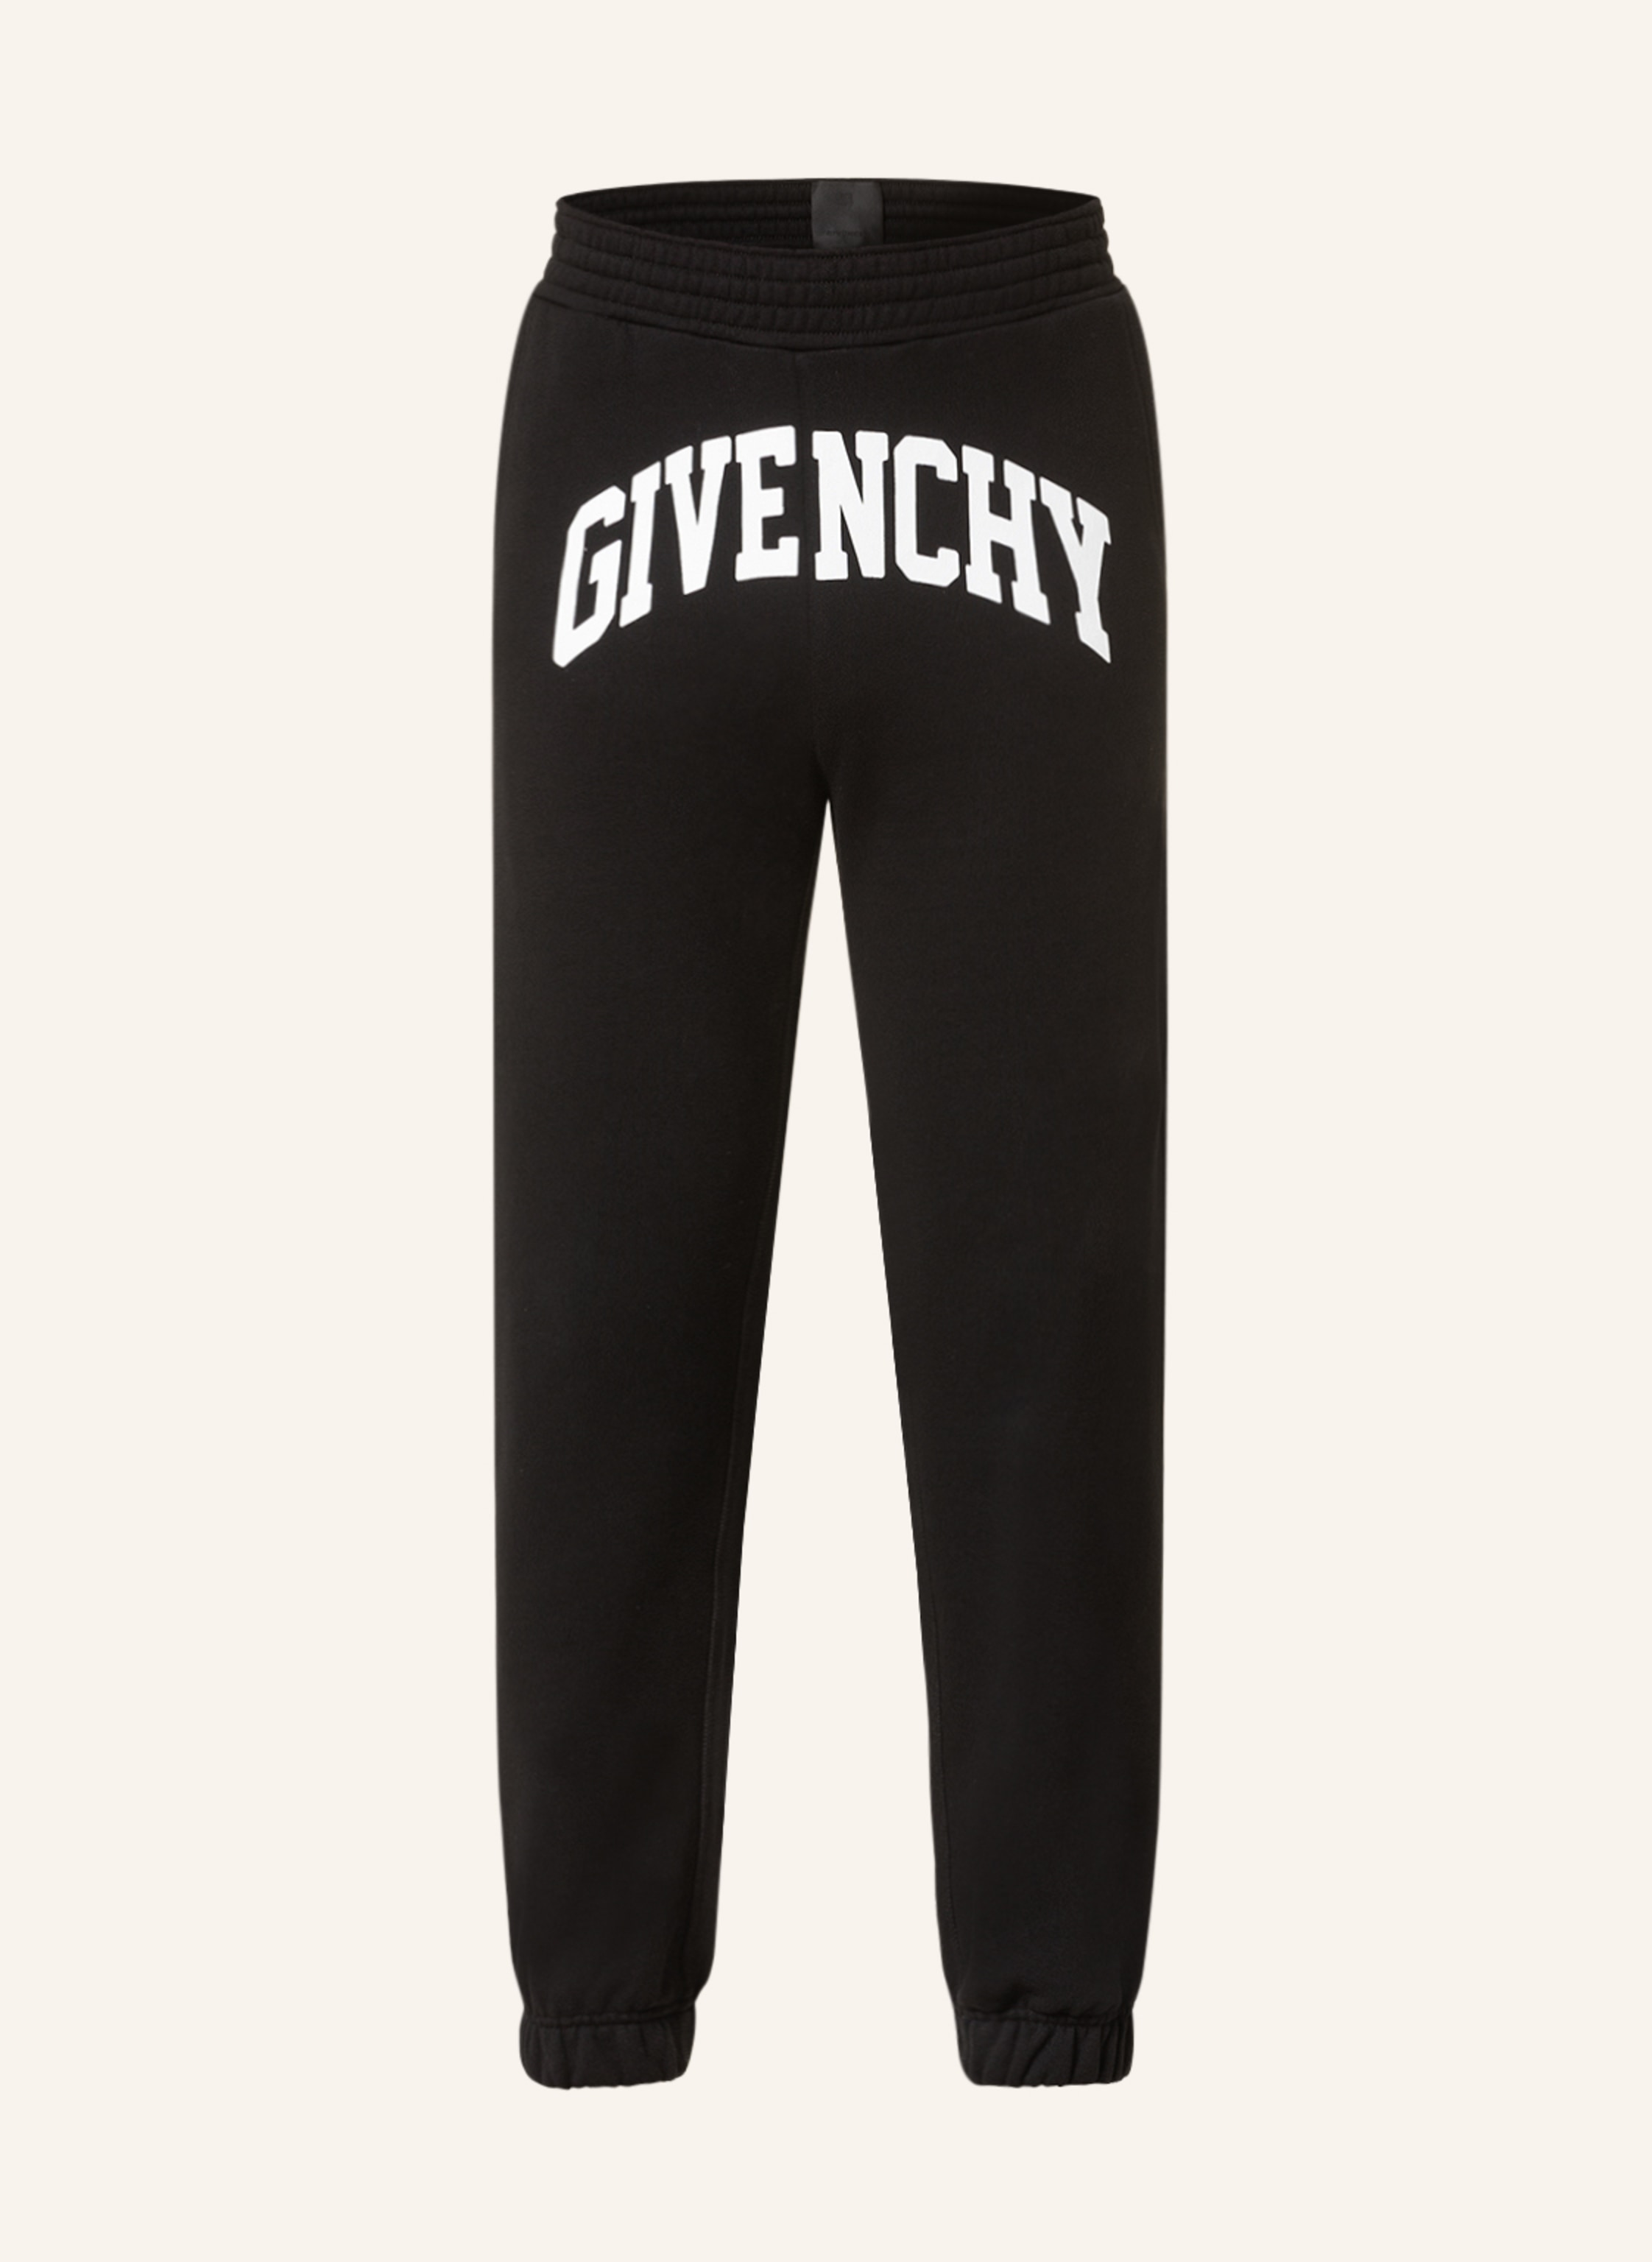 GIVENCHY Sweatpants in black/ white